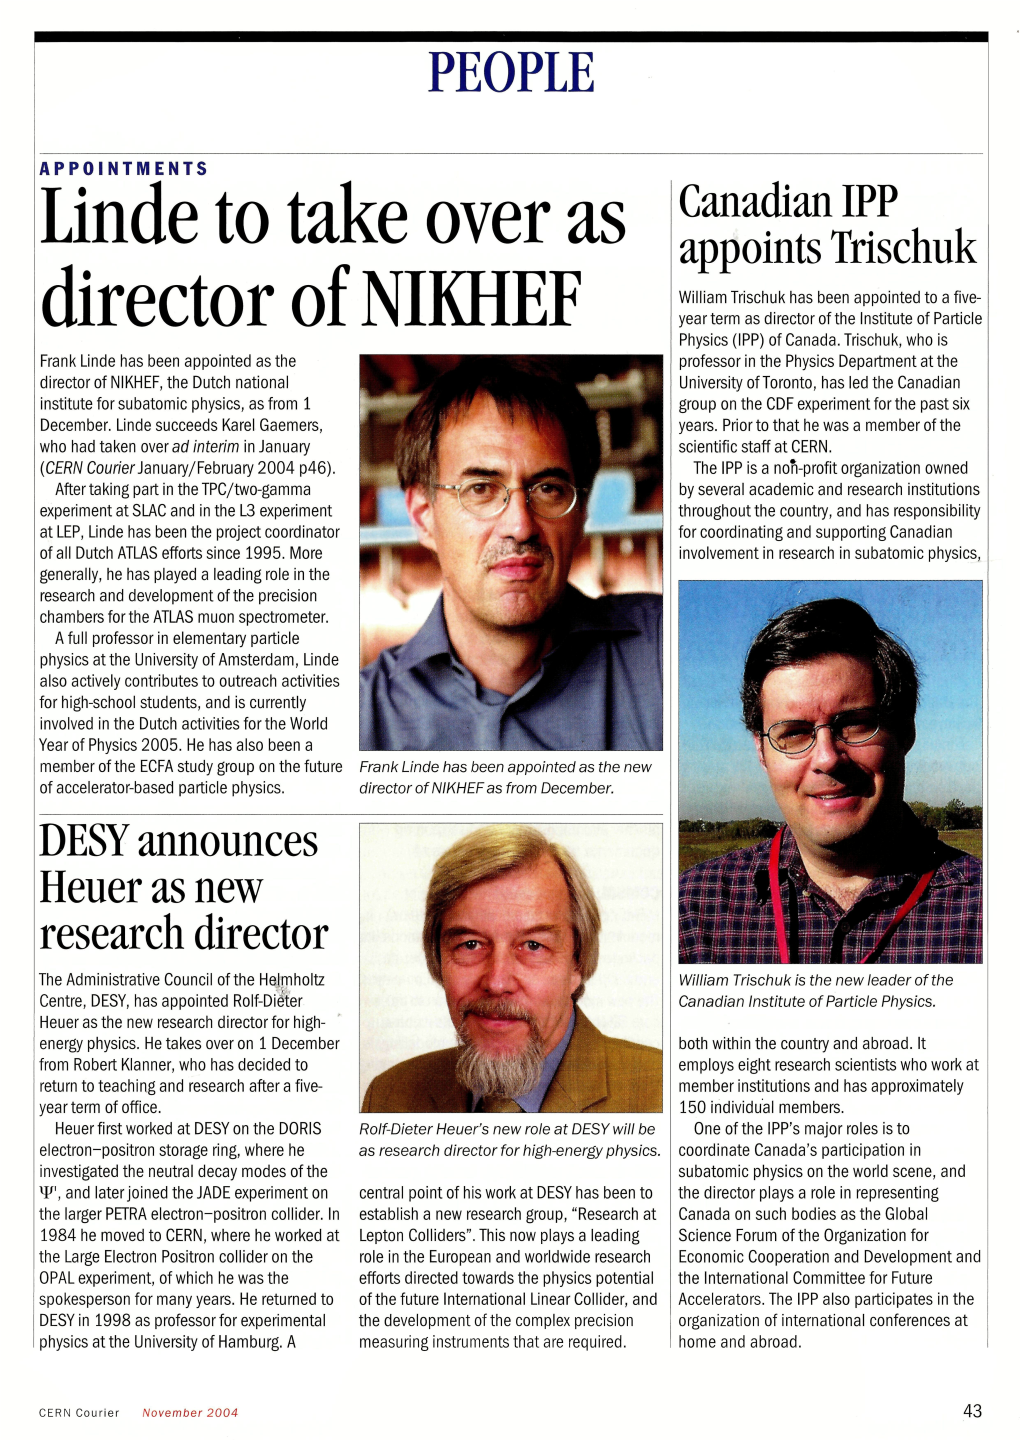 Linde to Take Over As Director of NIKHEF